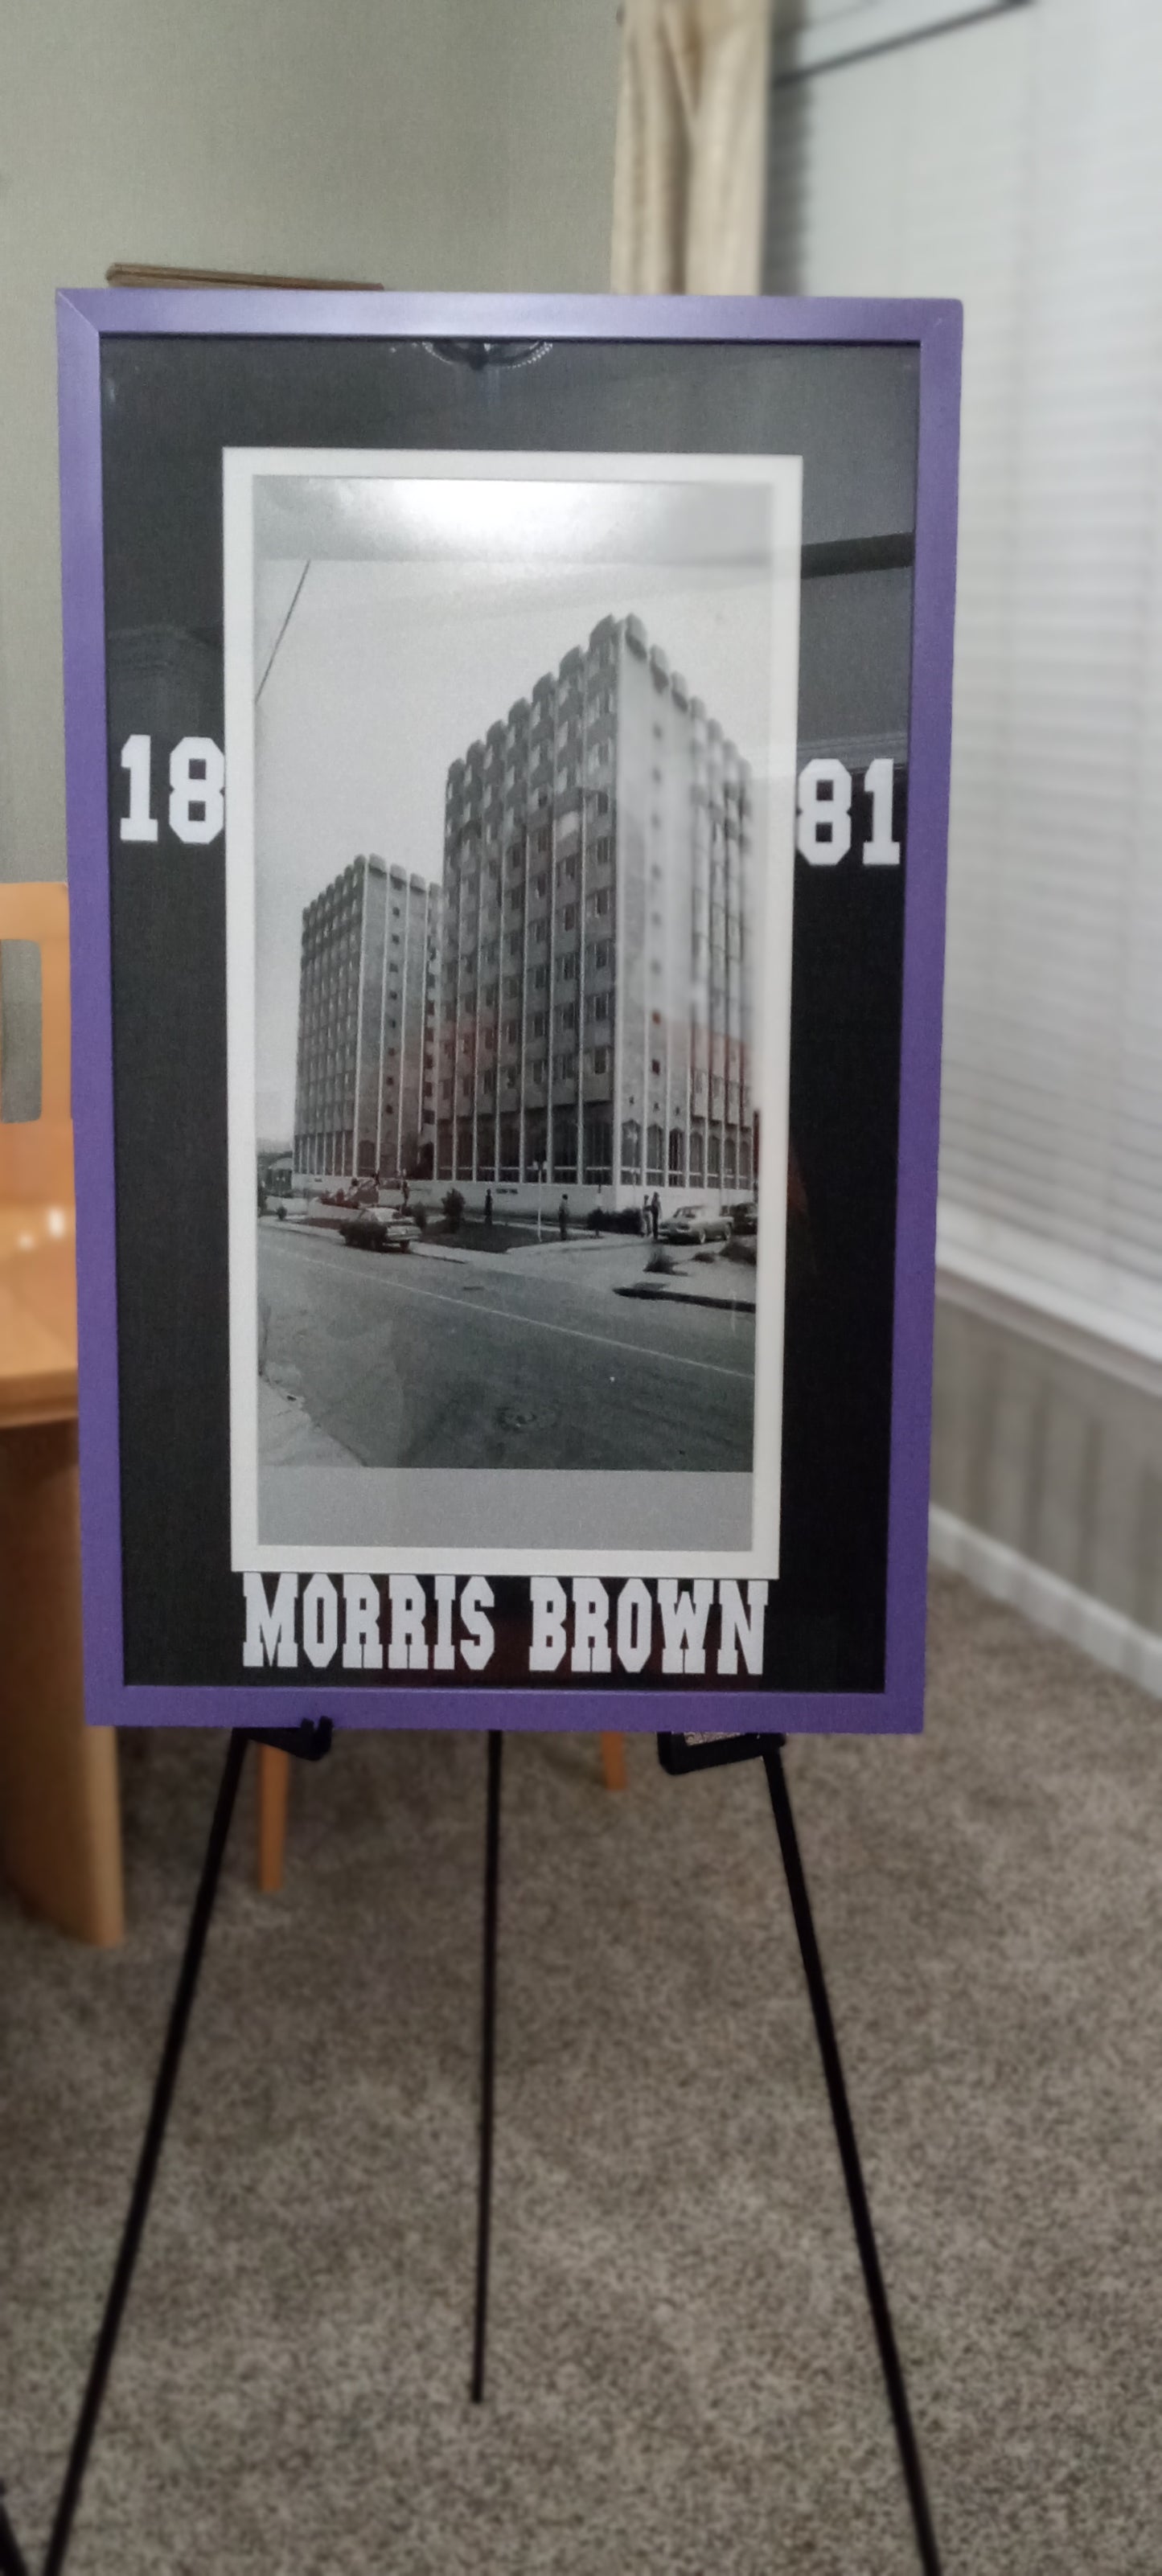 "MORRIS BROWN COLLECTION"